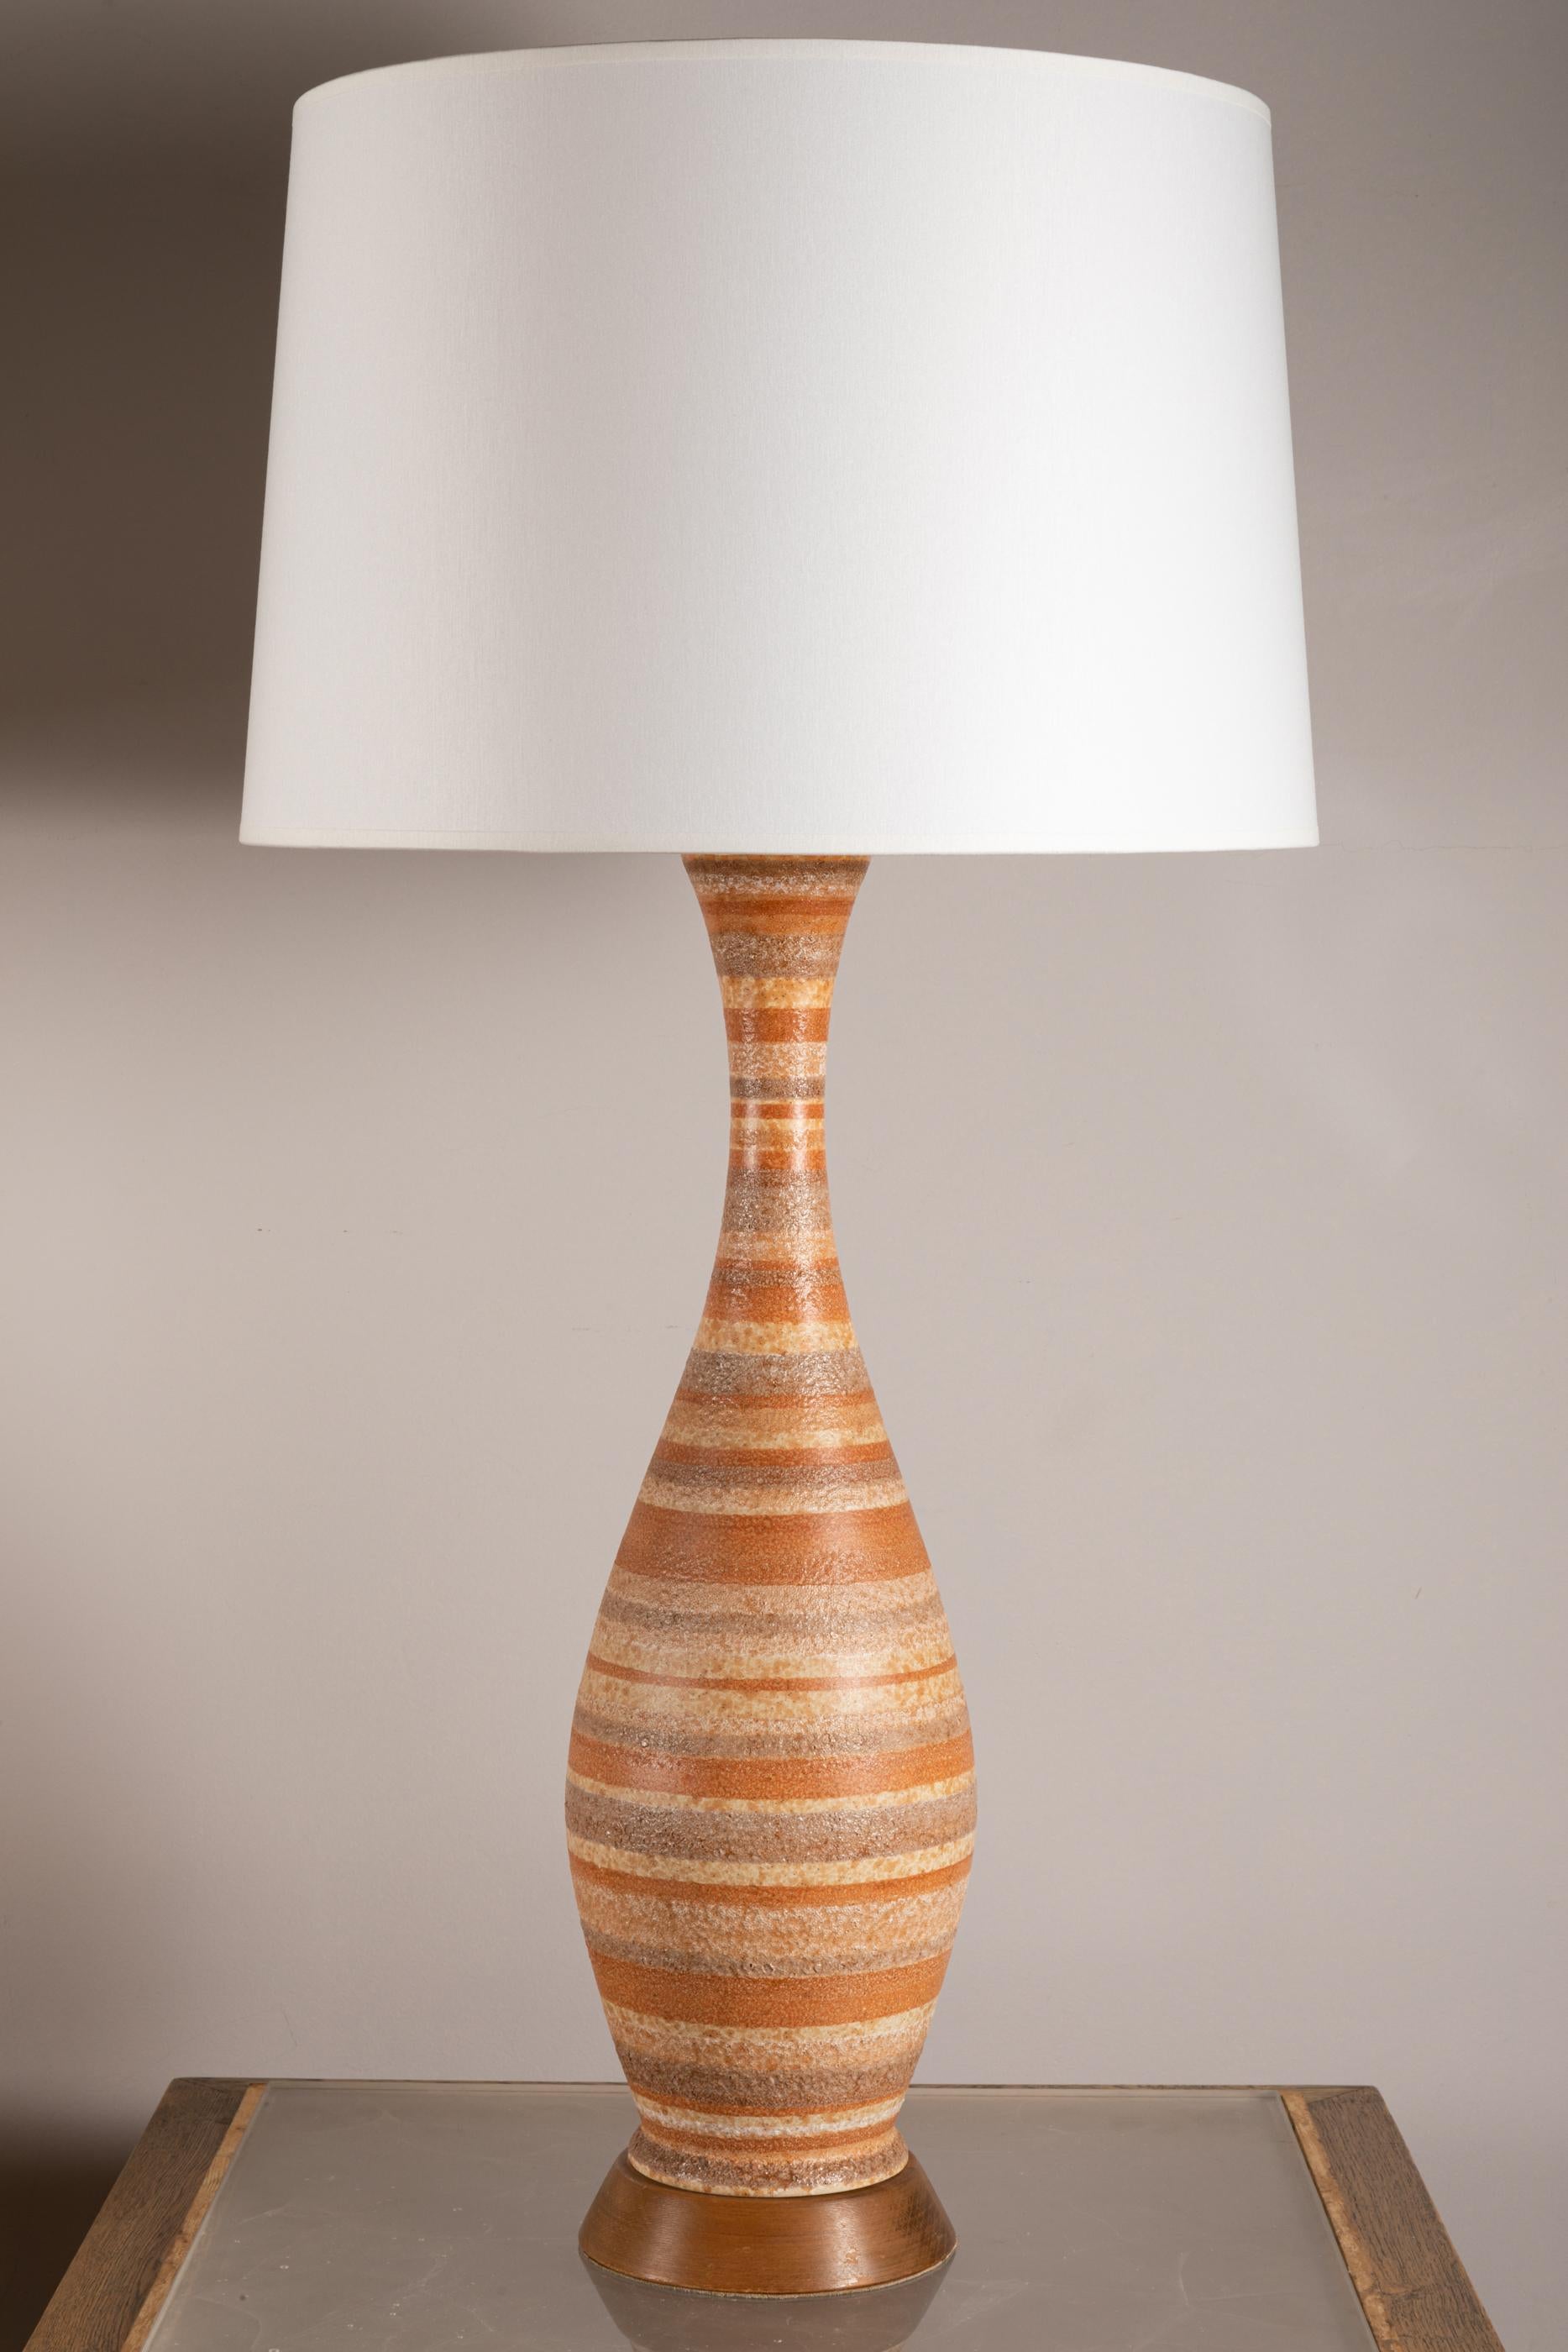 Mid-Century Modern Pair of Ceramic Table Lamps, Italy 1950's